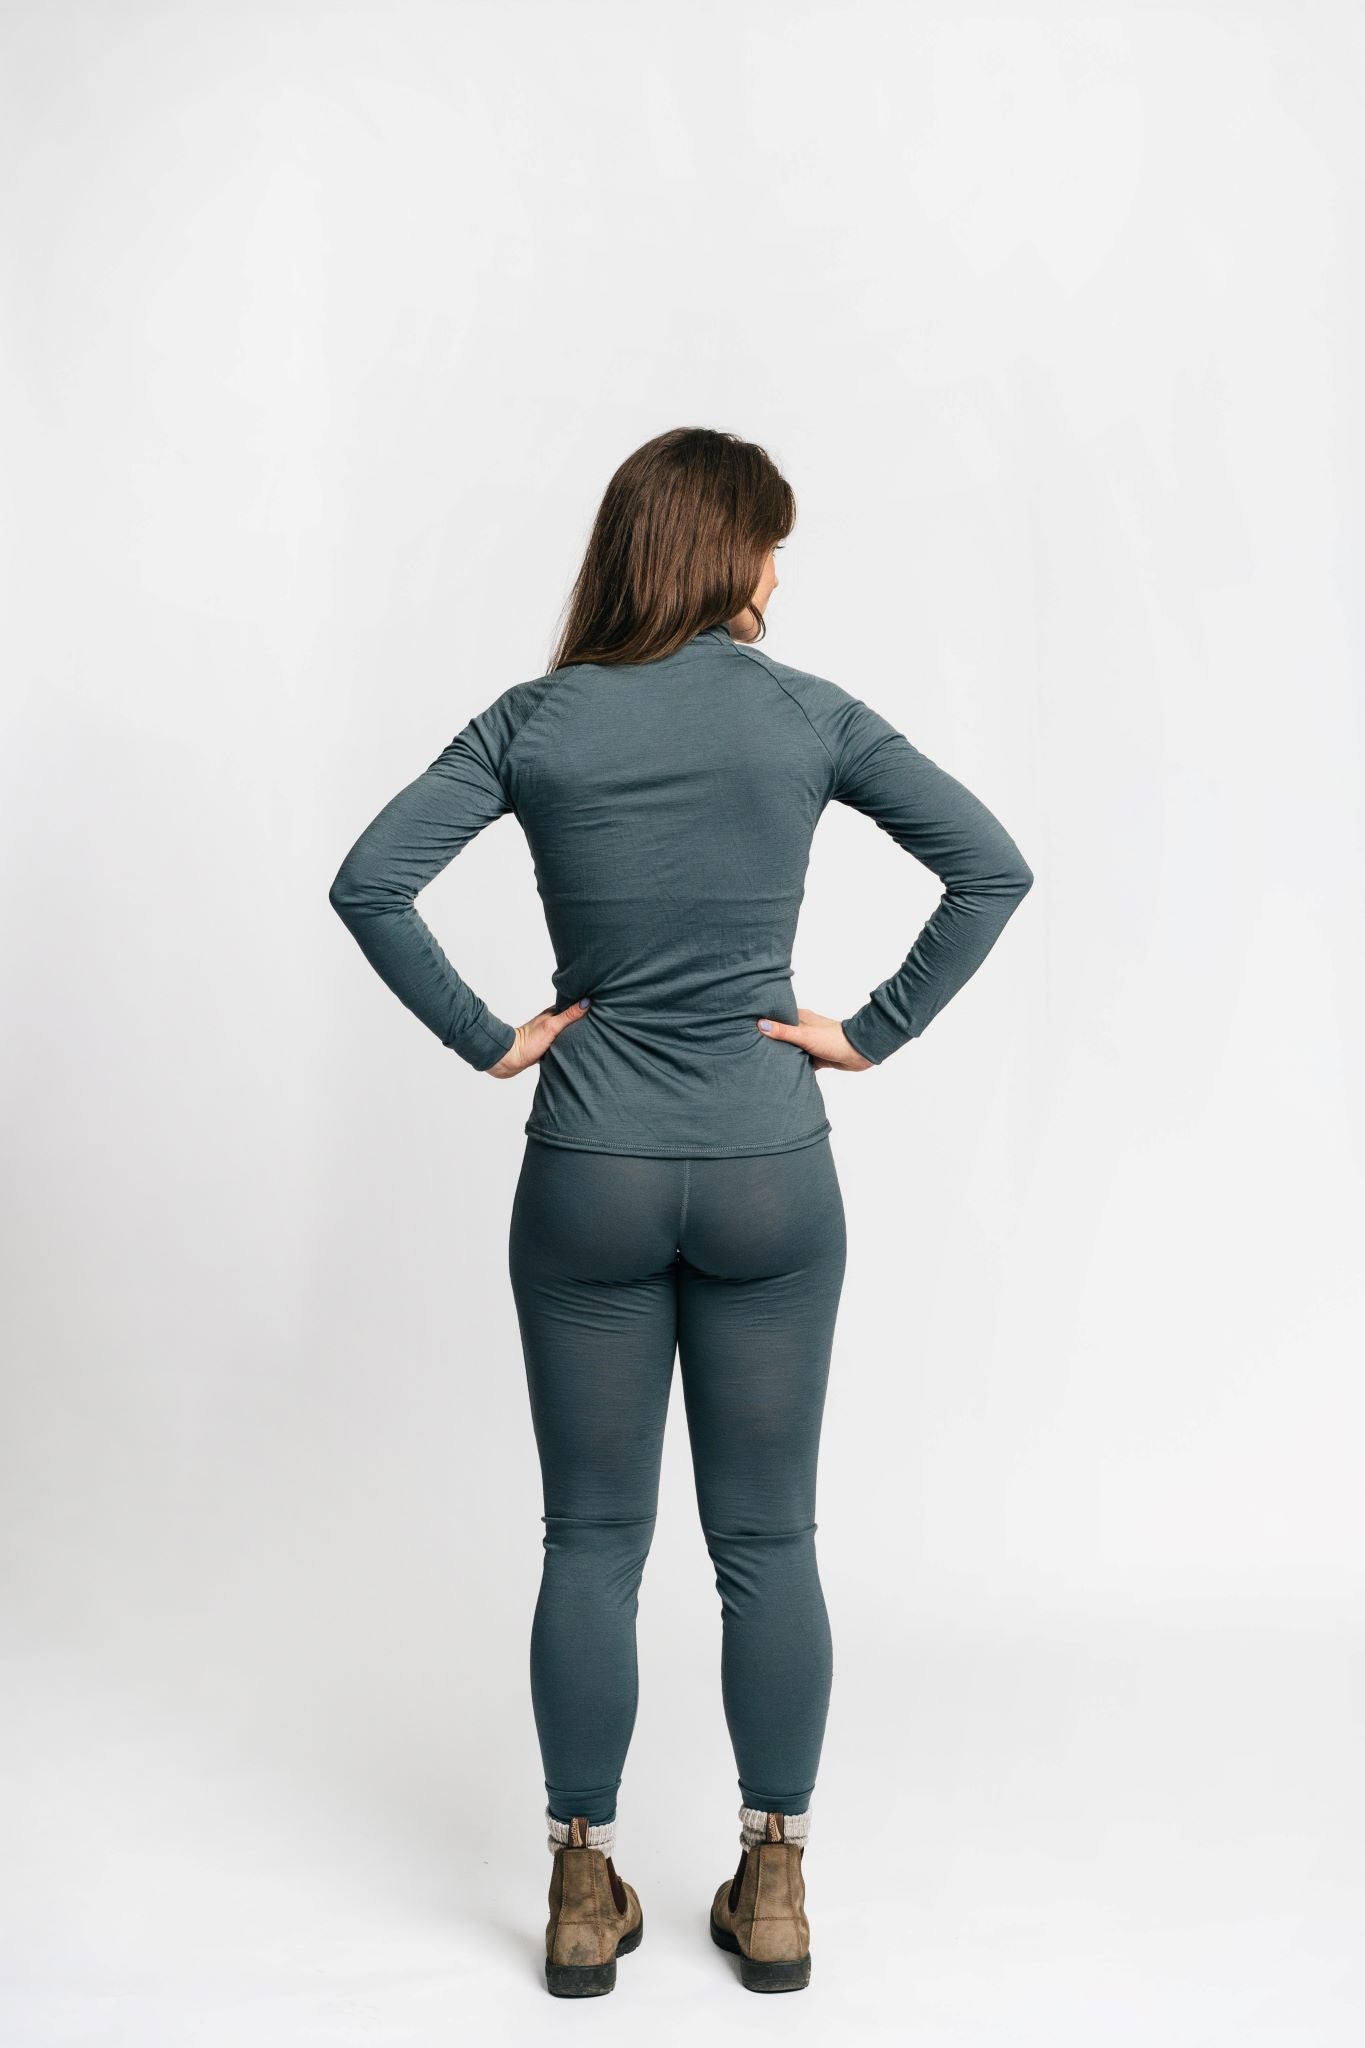 alpine fit merino wool base layer top and bottom on model viewed from the back